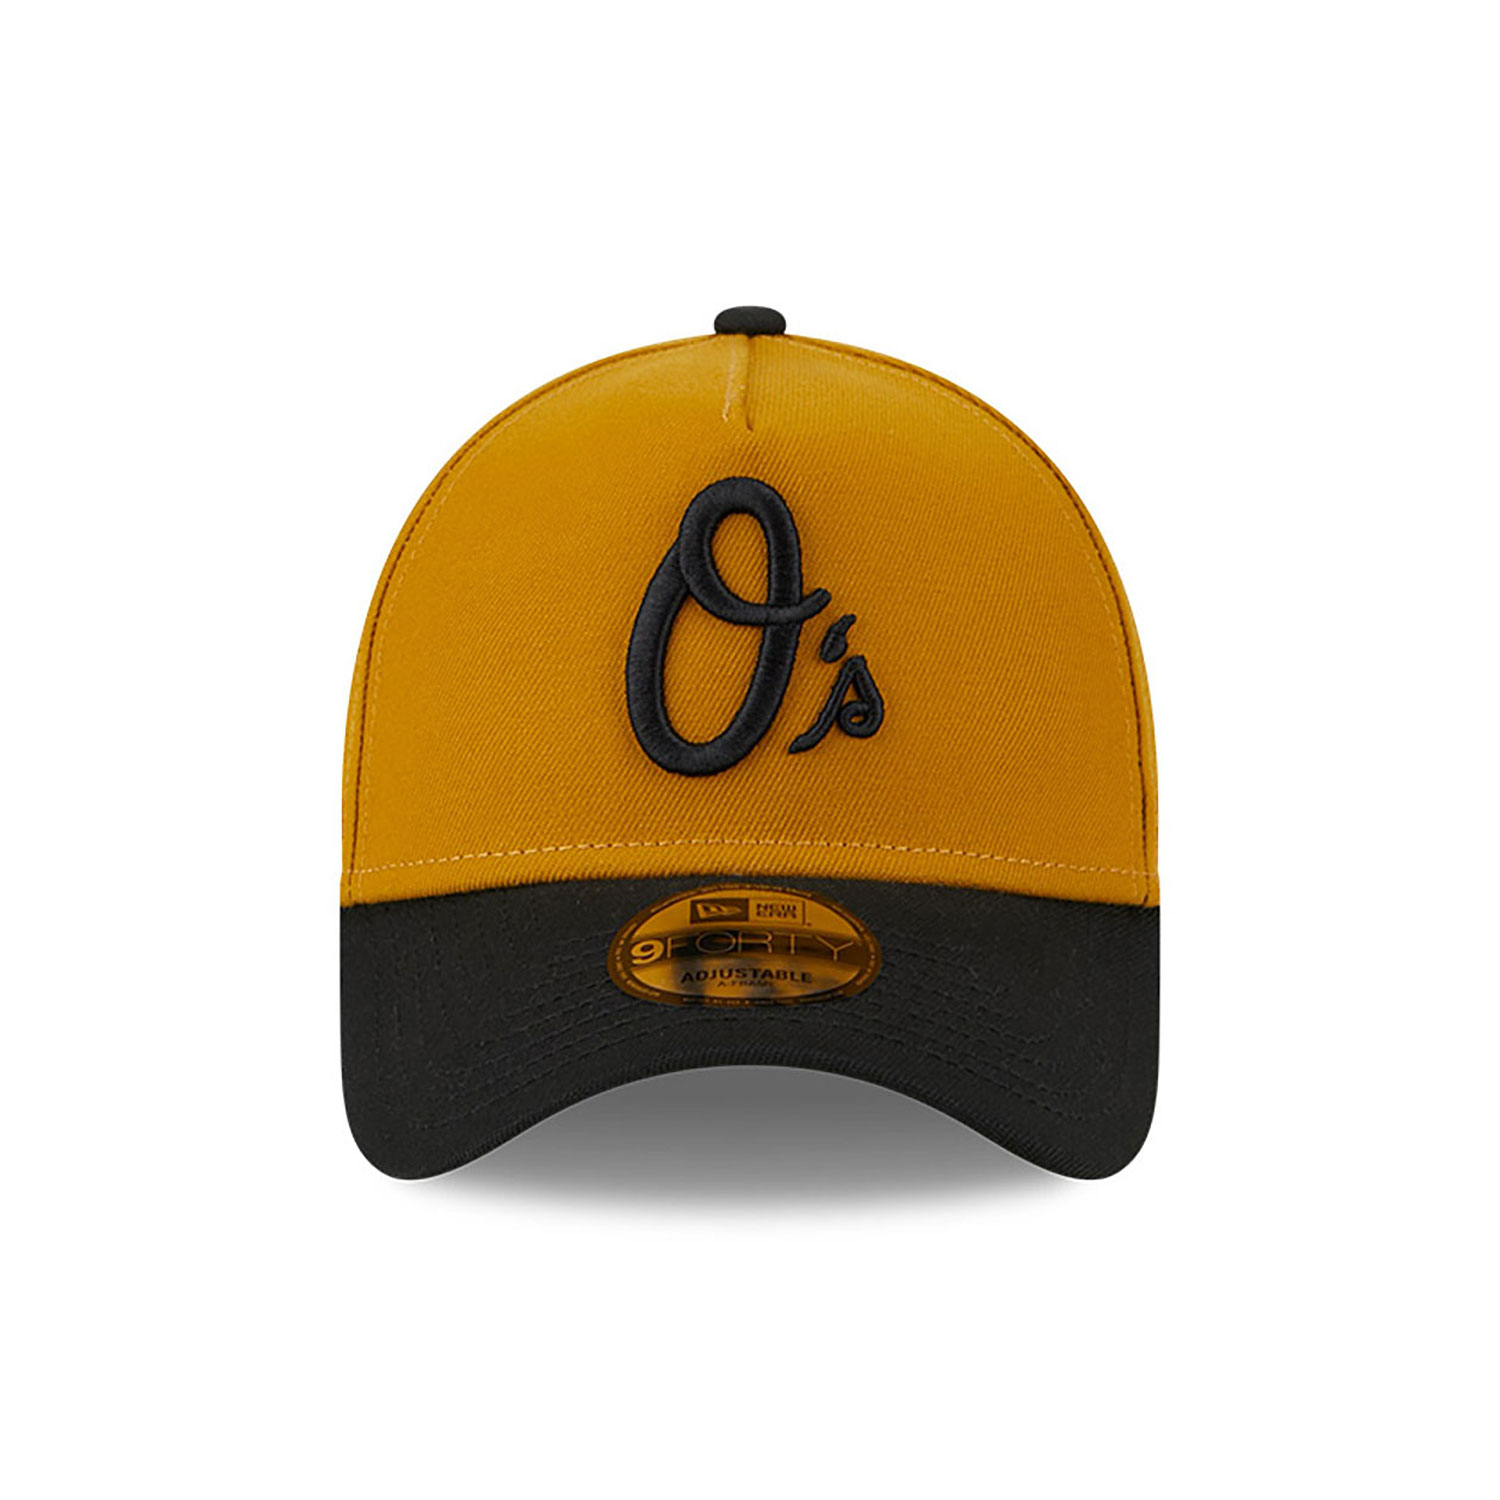 Baltimore Orioles Rustic Fall Gold A-Frame 9FORTY Adjustable Cap